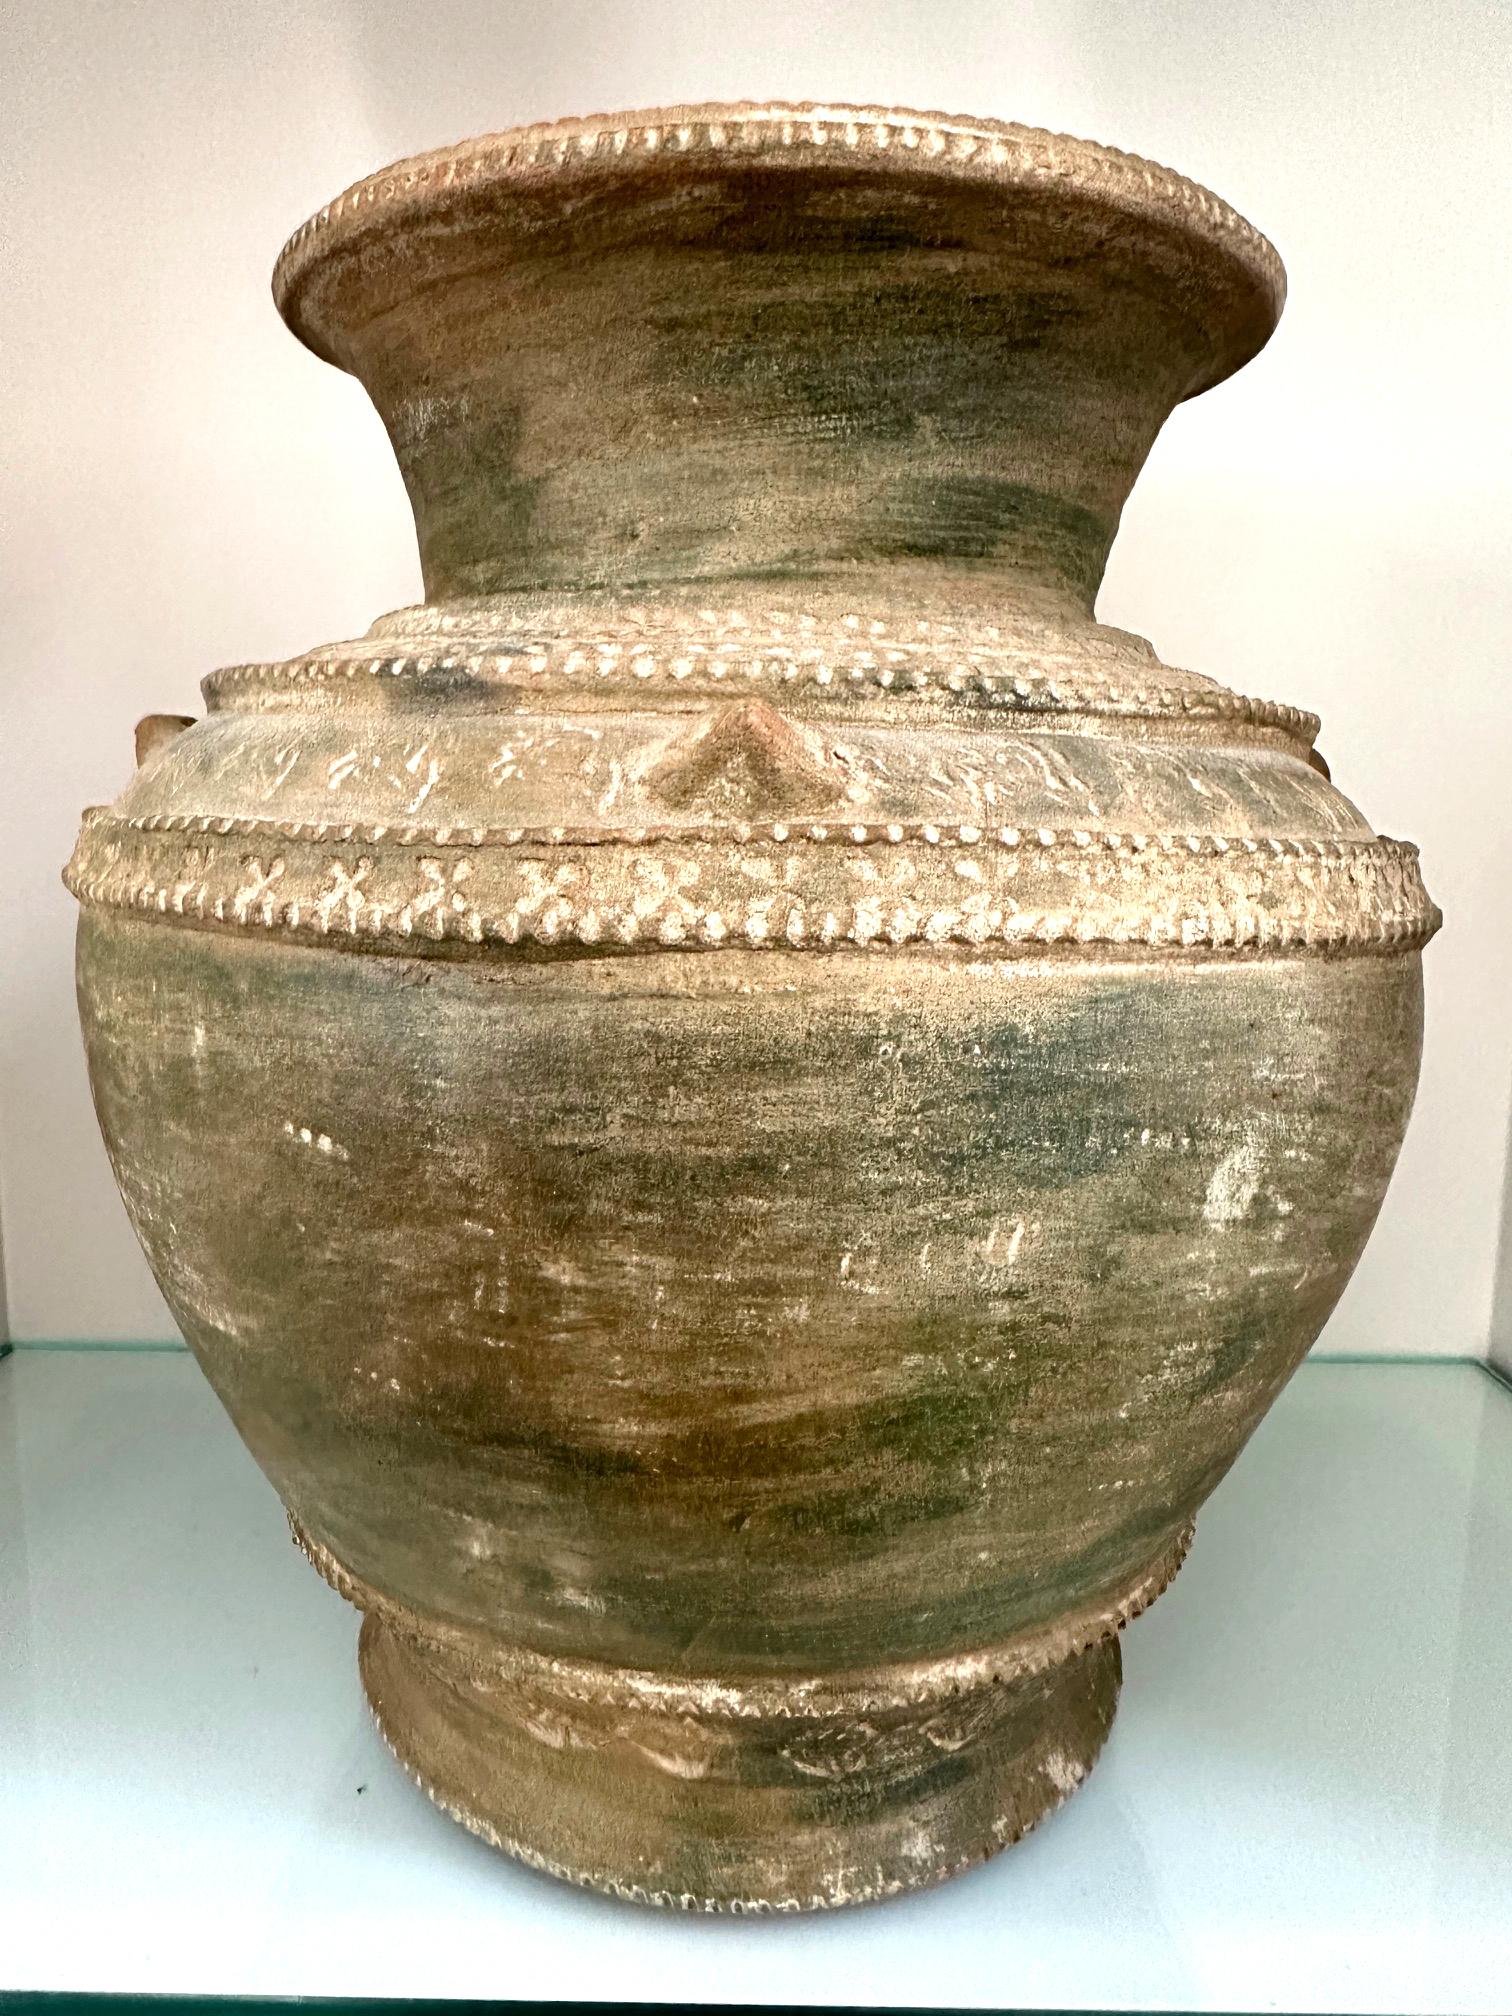 A terracotta pottery funerary urn with lid from Korea Unified Silla Period, circa 9th century. The jar was in a classic globular form with raised shoulder. Although the surface was unglazed, the jar features decoration with the stamped floral